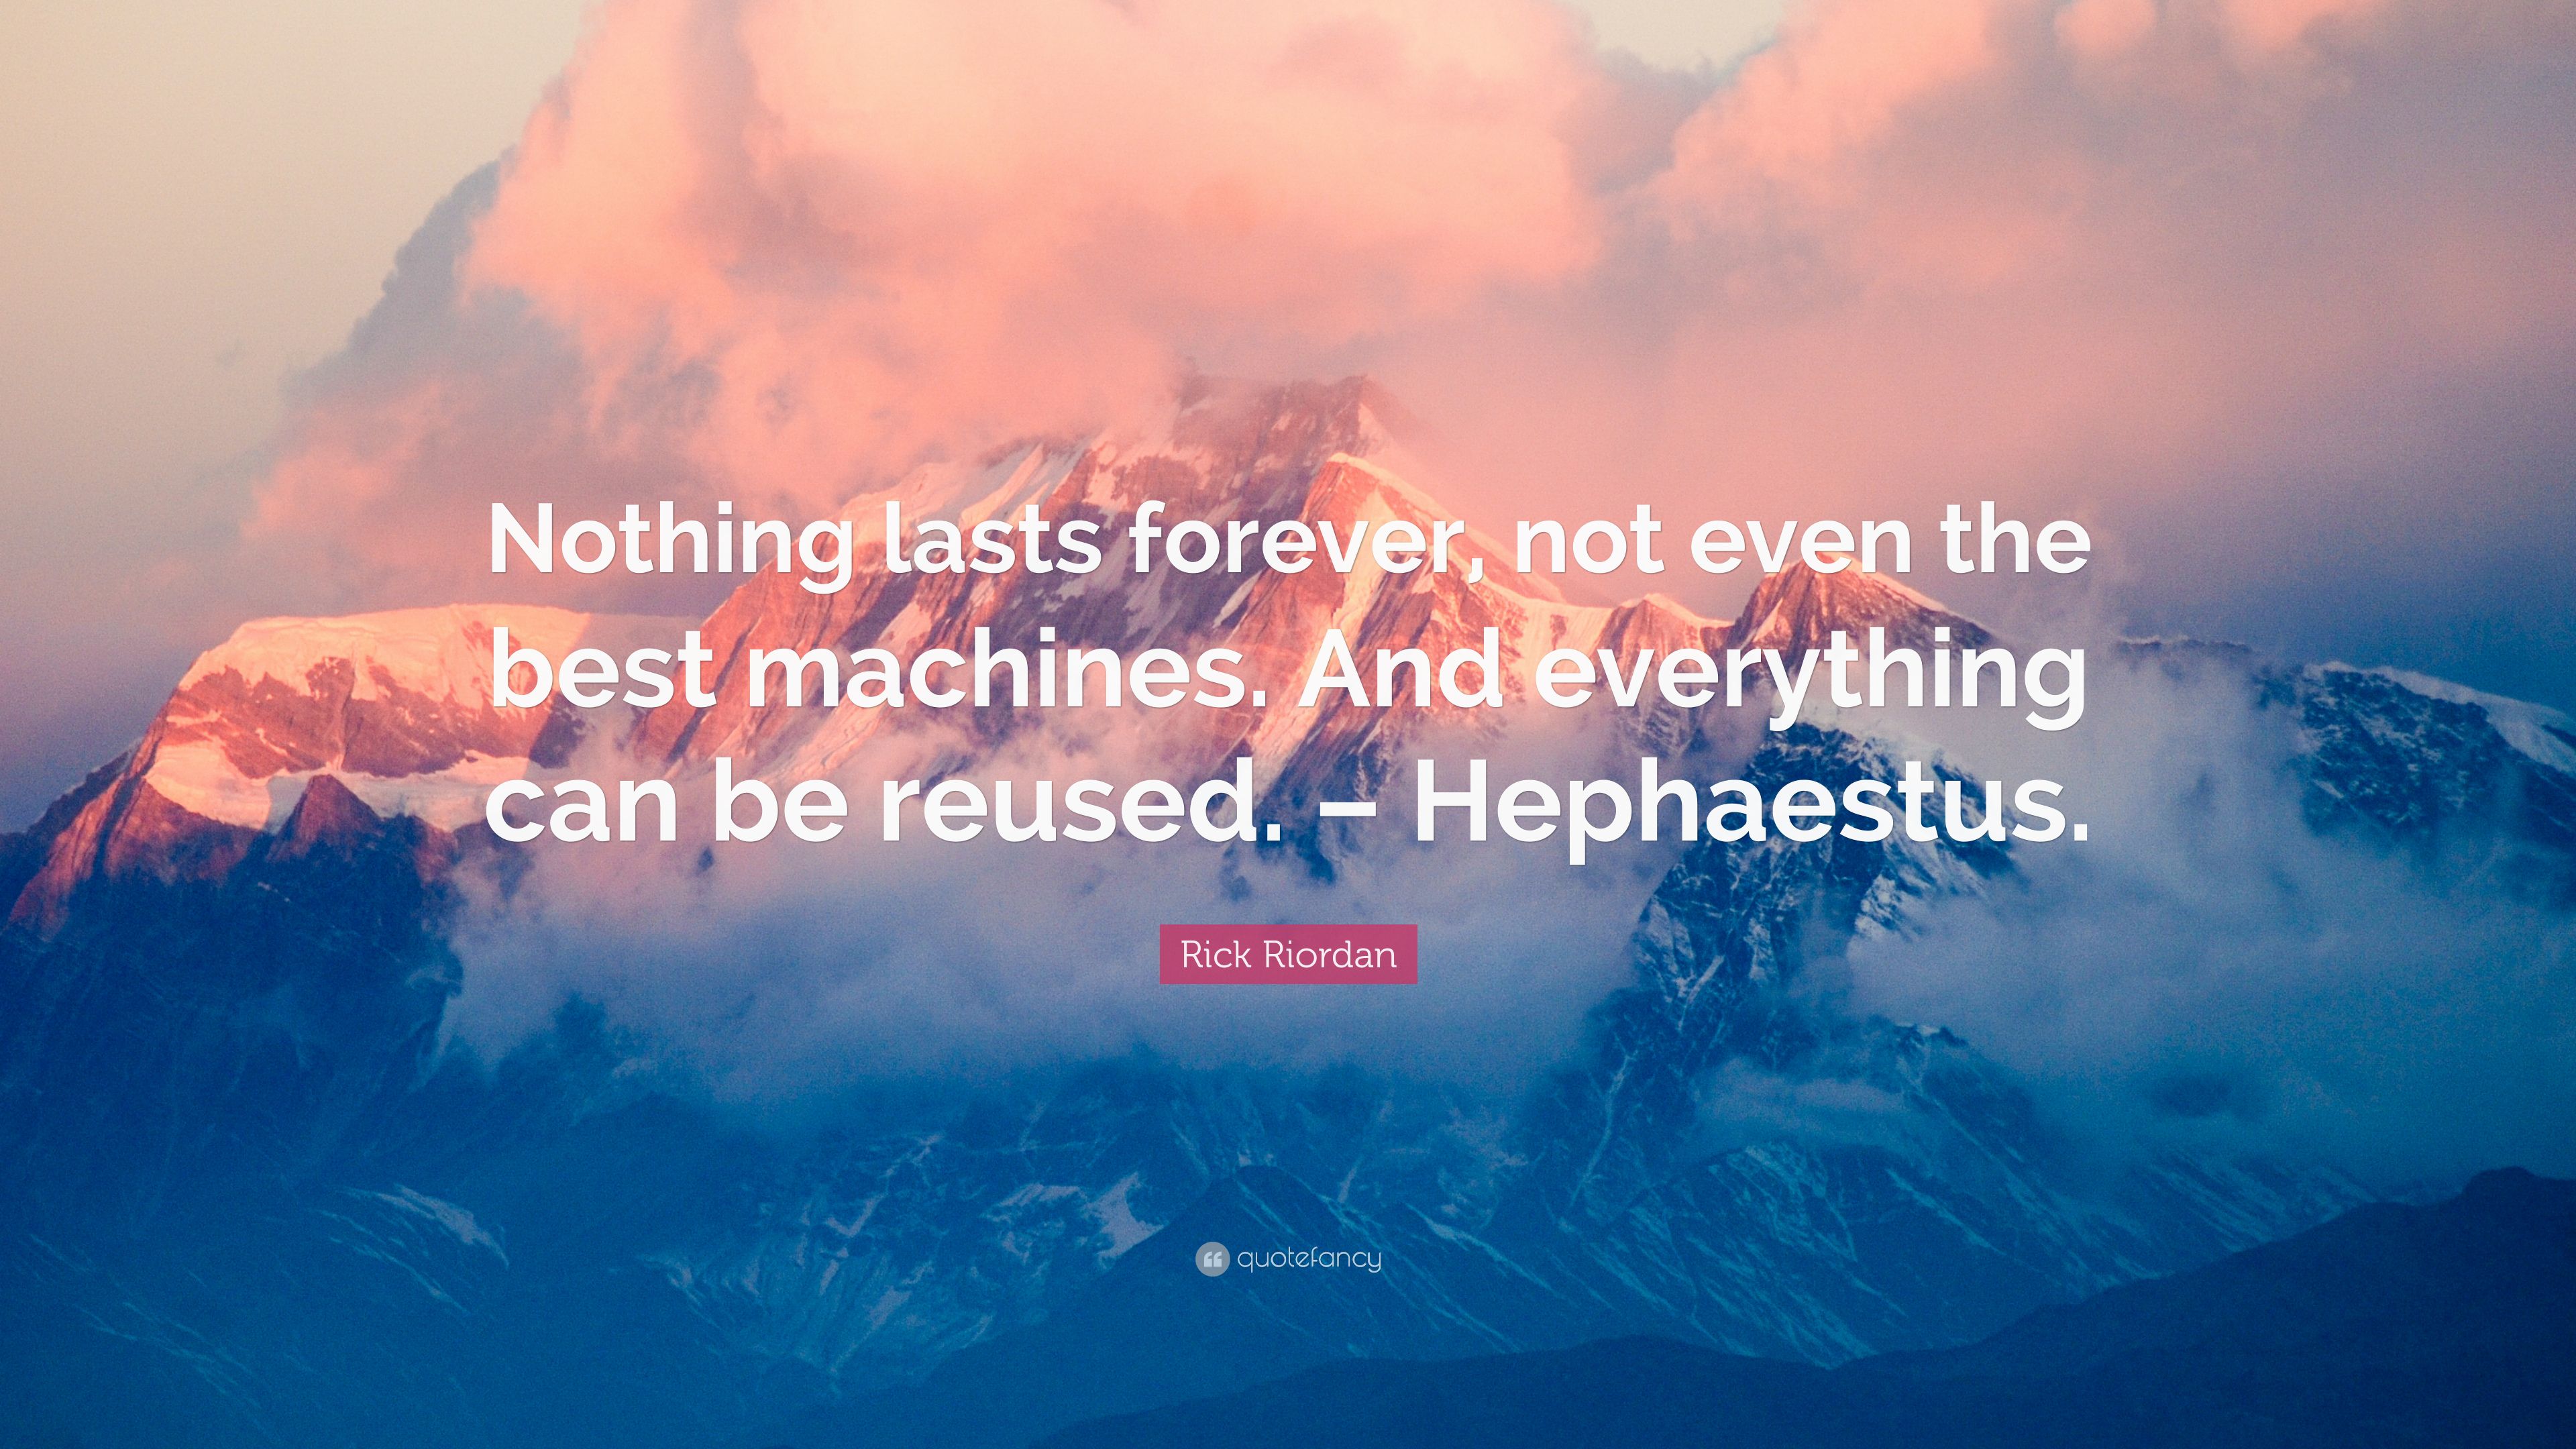 Rick Riordan Quote: “Nothing lasts forever, not even the best machines. And everything can be reused